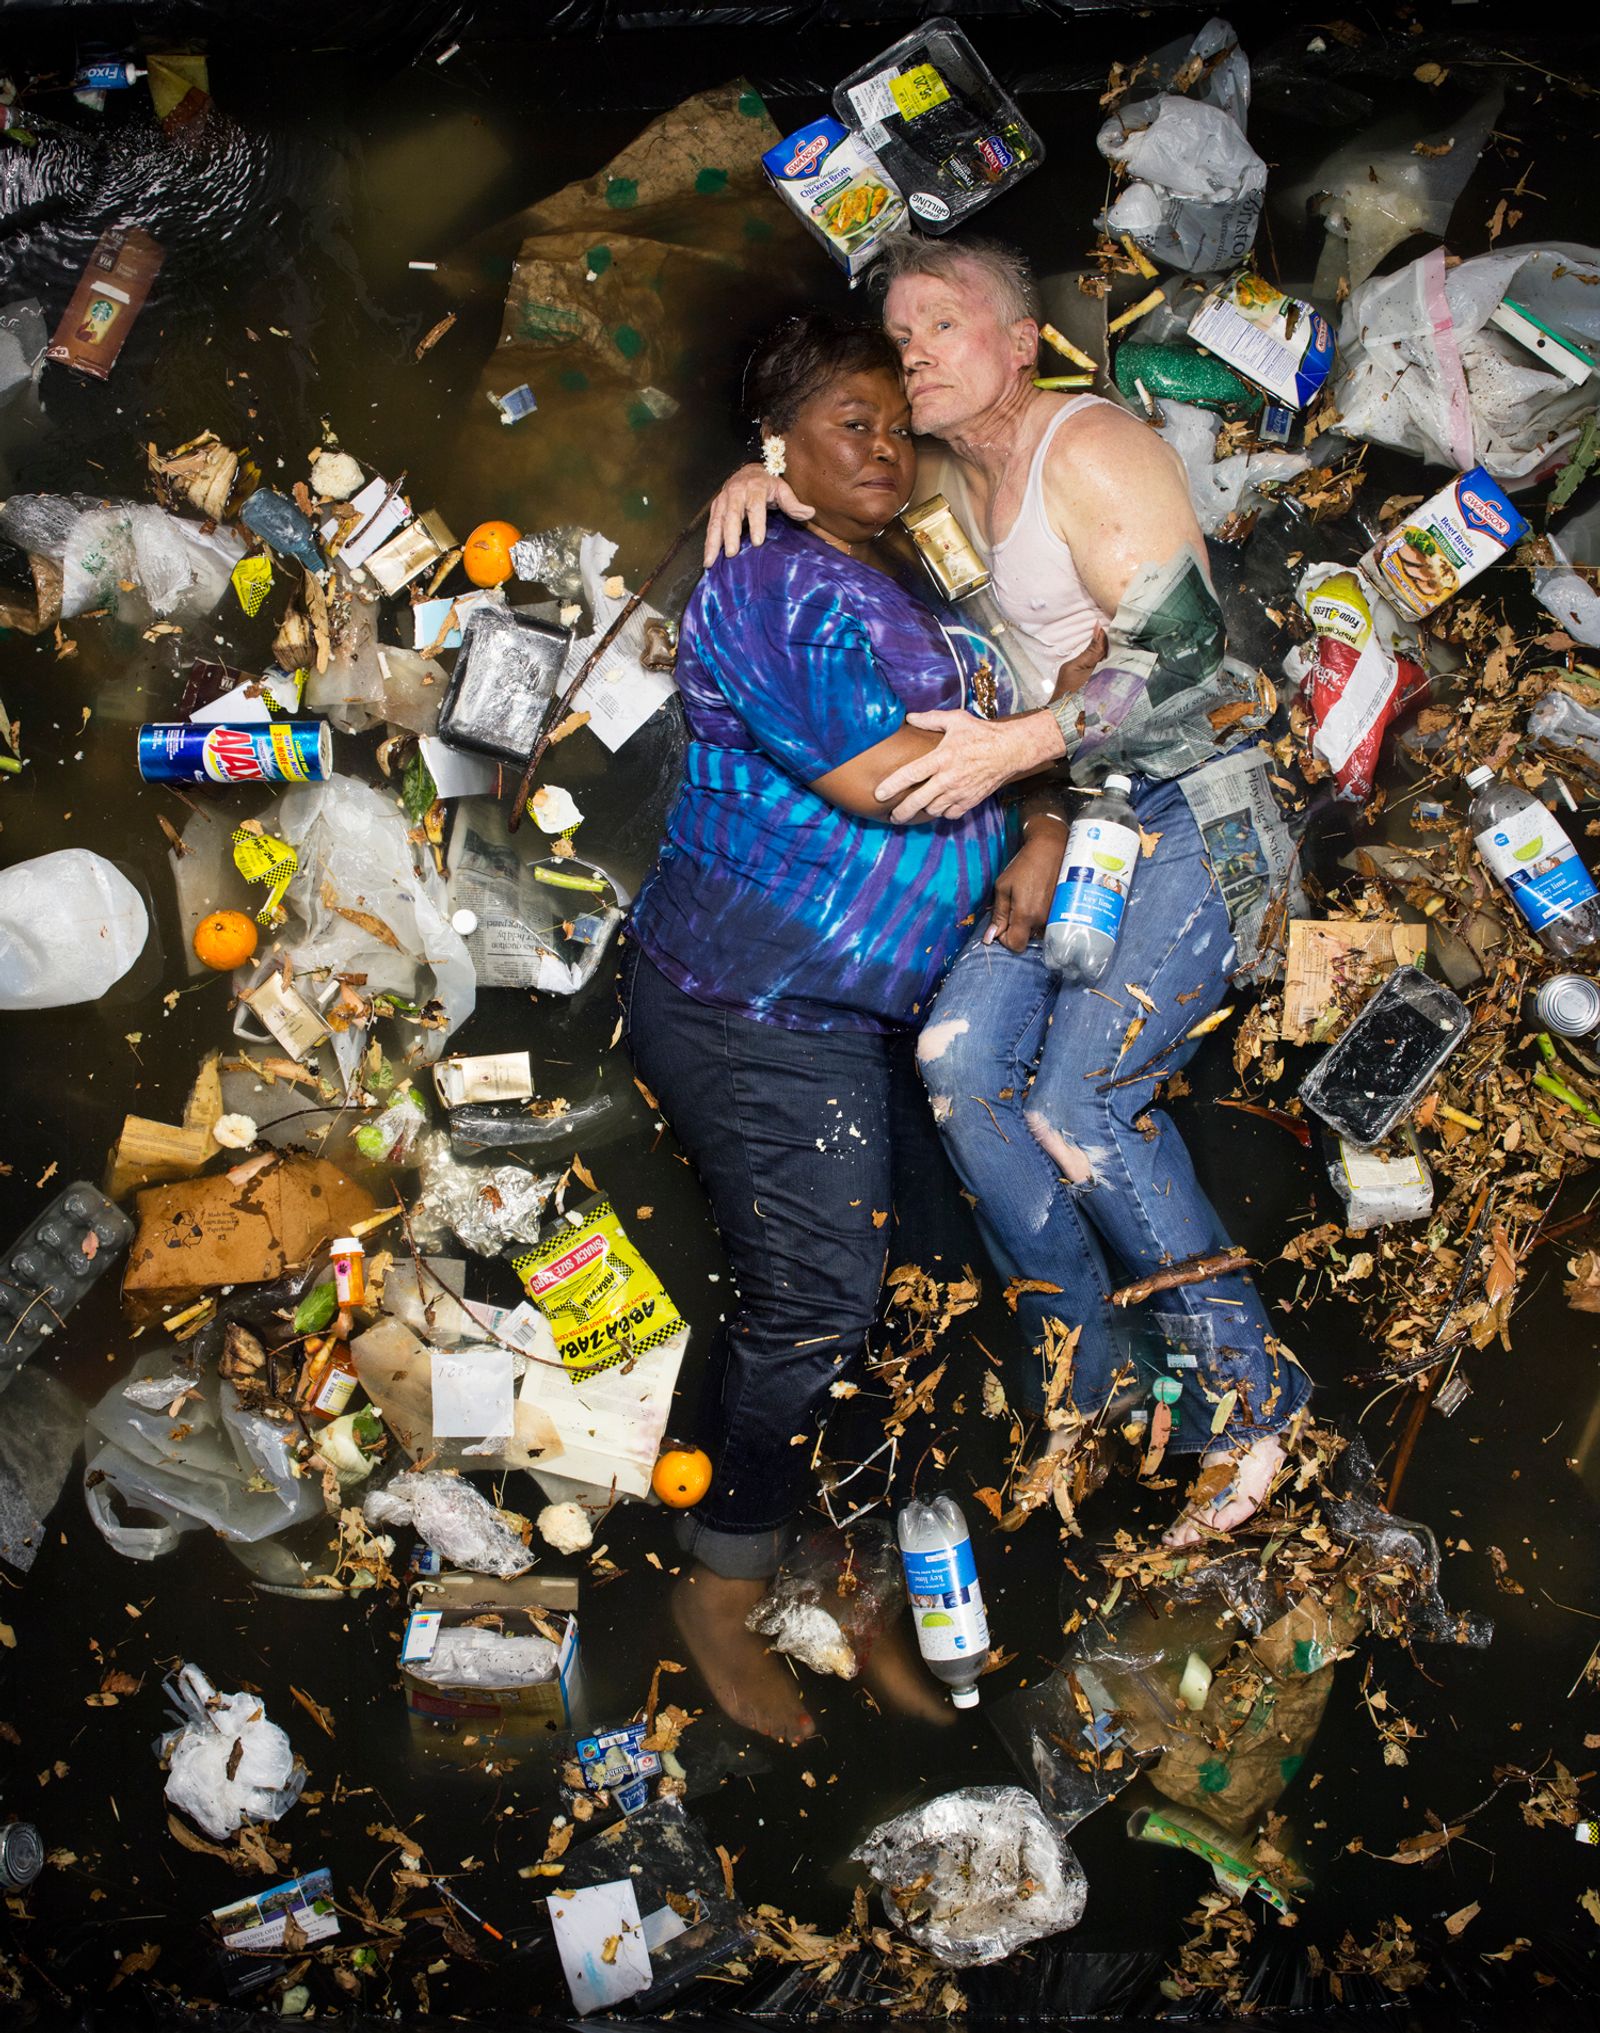 © Gregg Segal - Image from the 7 Days of Garbage photography project